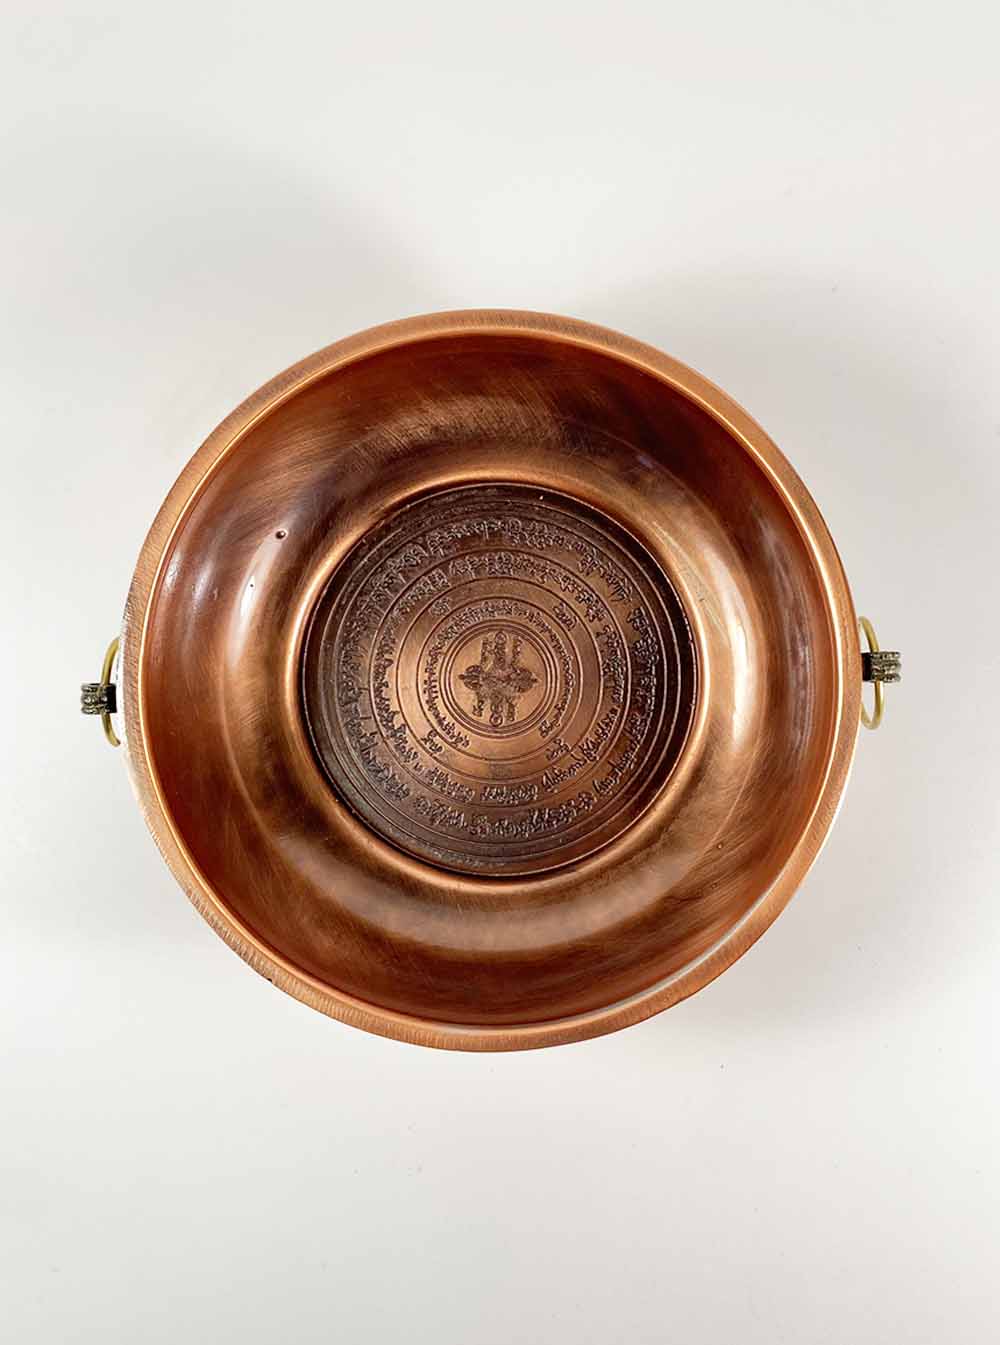 Copper Smoke Offering Plate with Six Realm Vajra Wheel Mantra